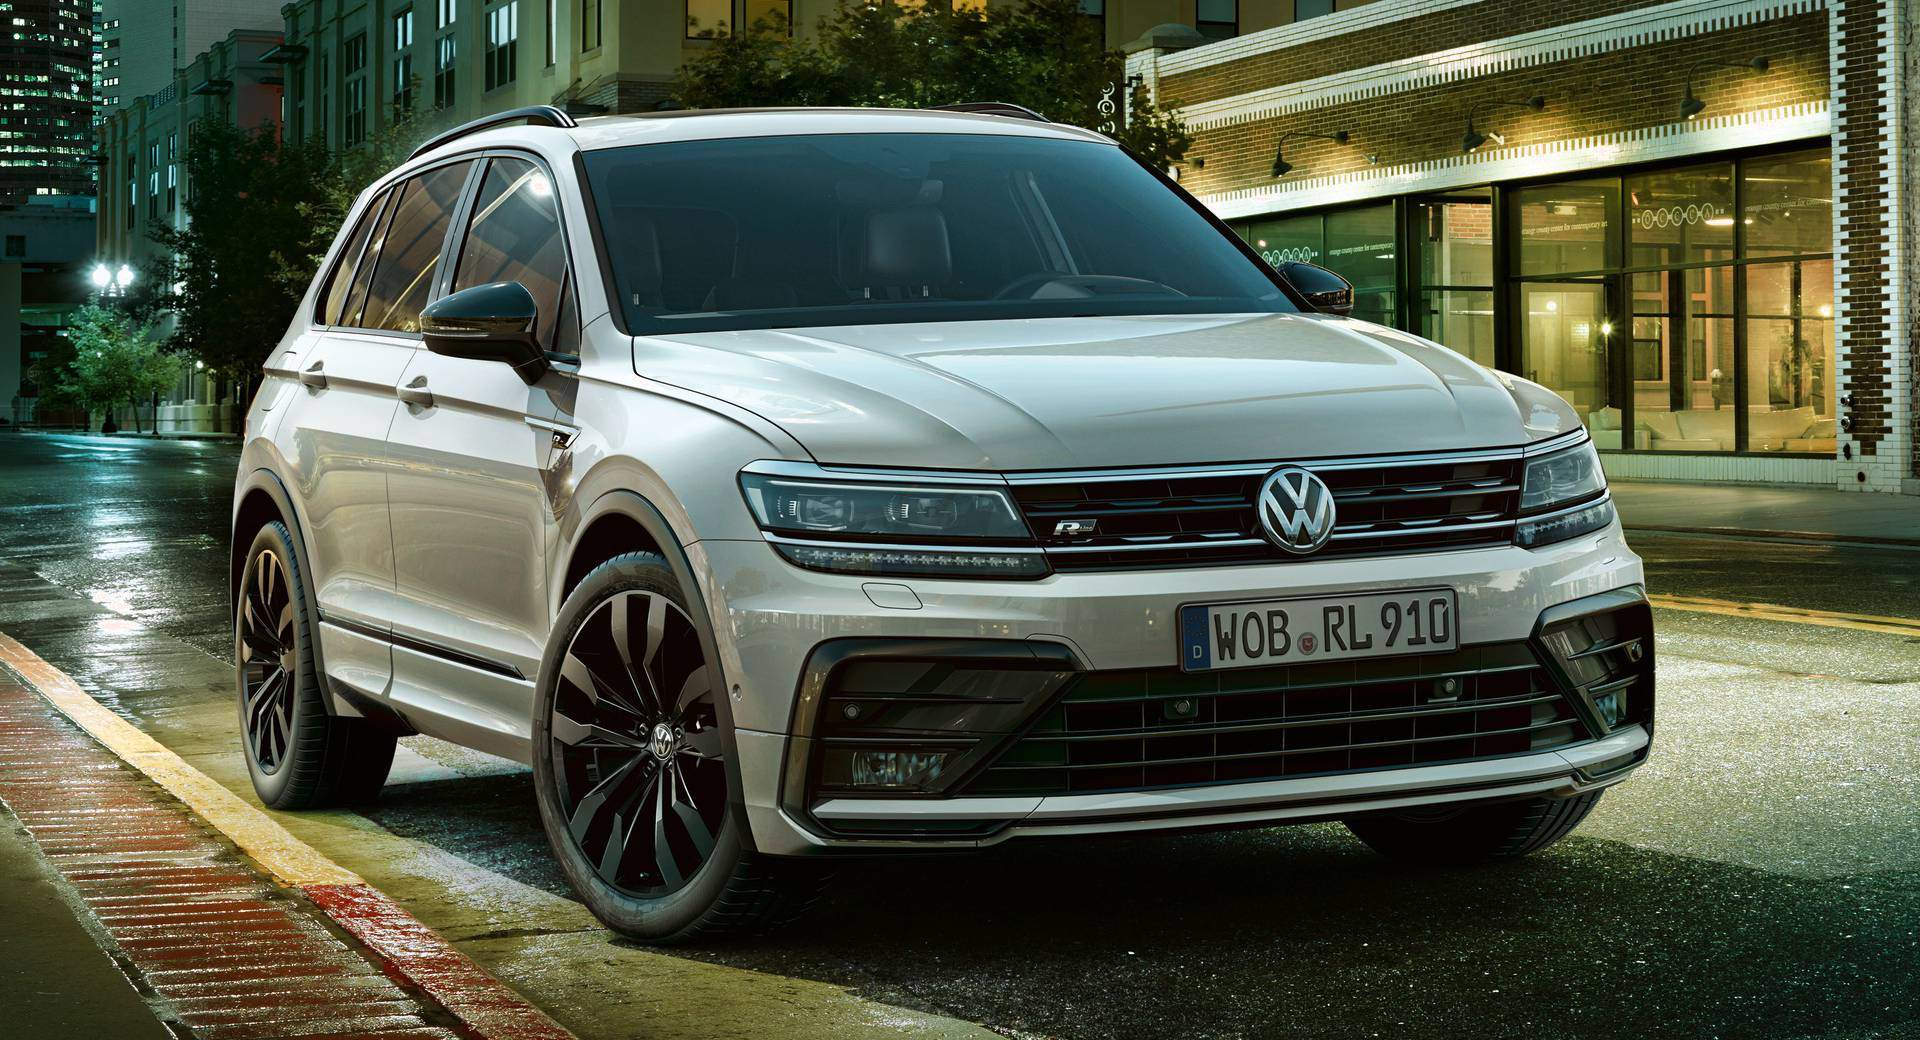 Vw Tiguan Goes For A More Sinister Look With Black Style R